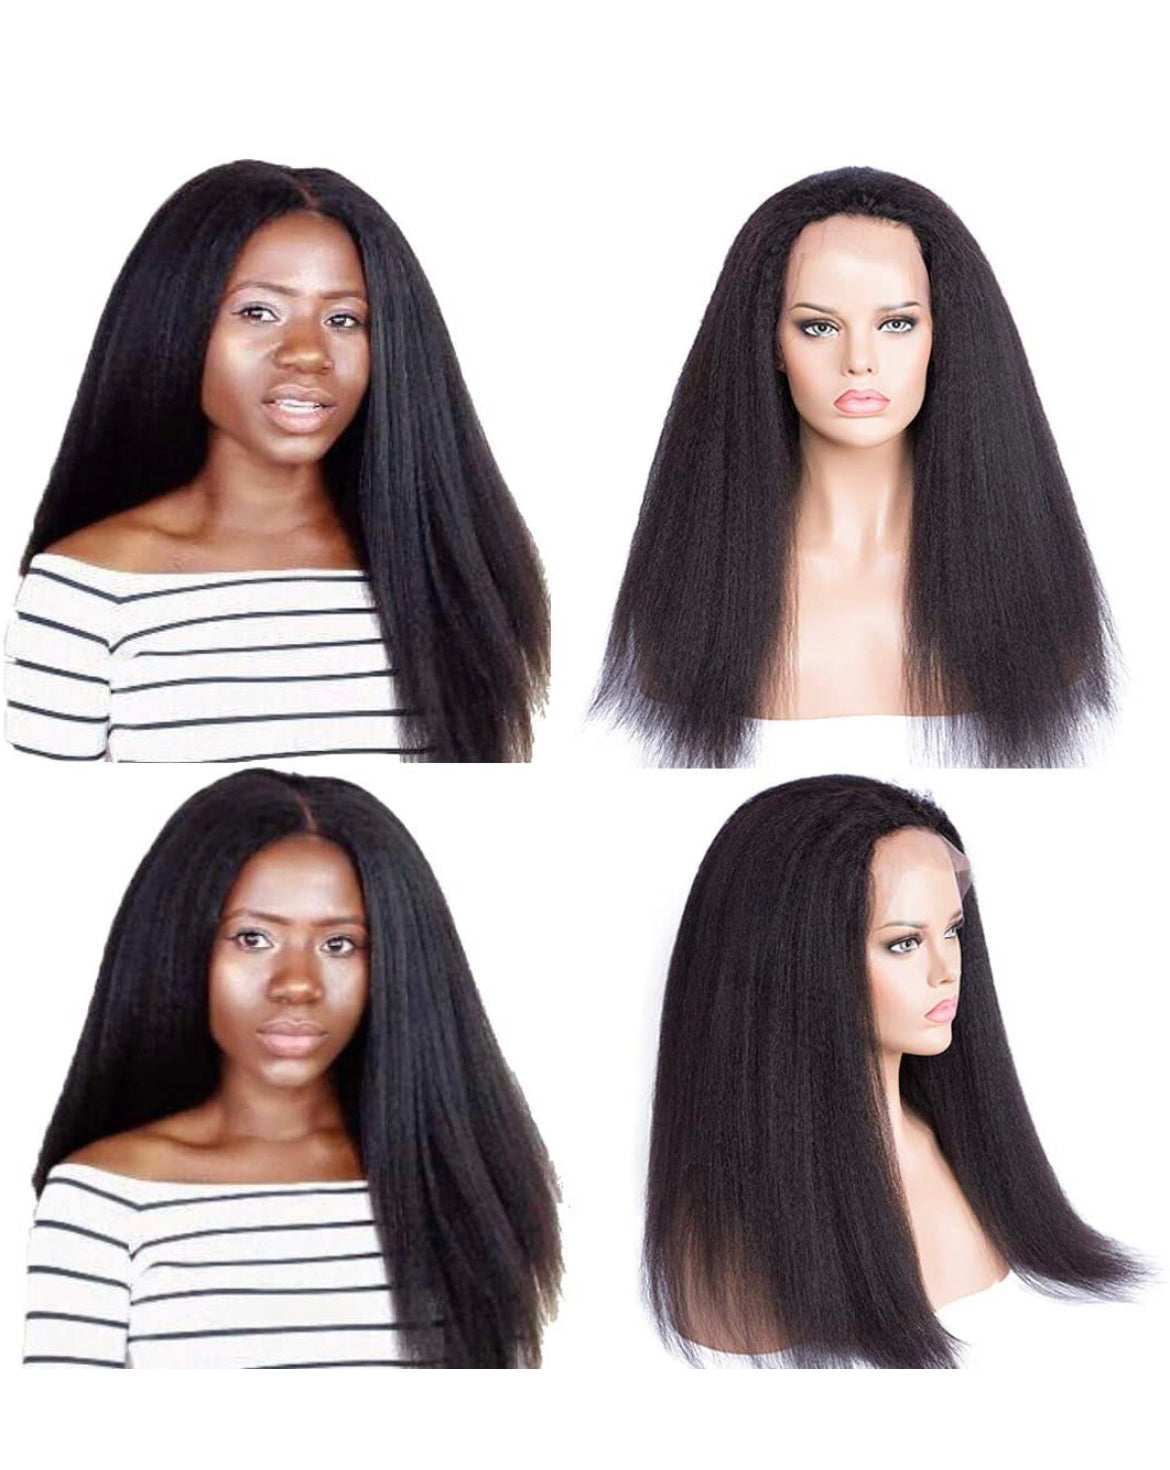 Hair replacement custom wig for black woman